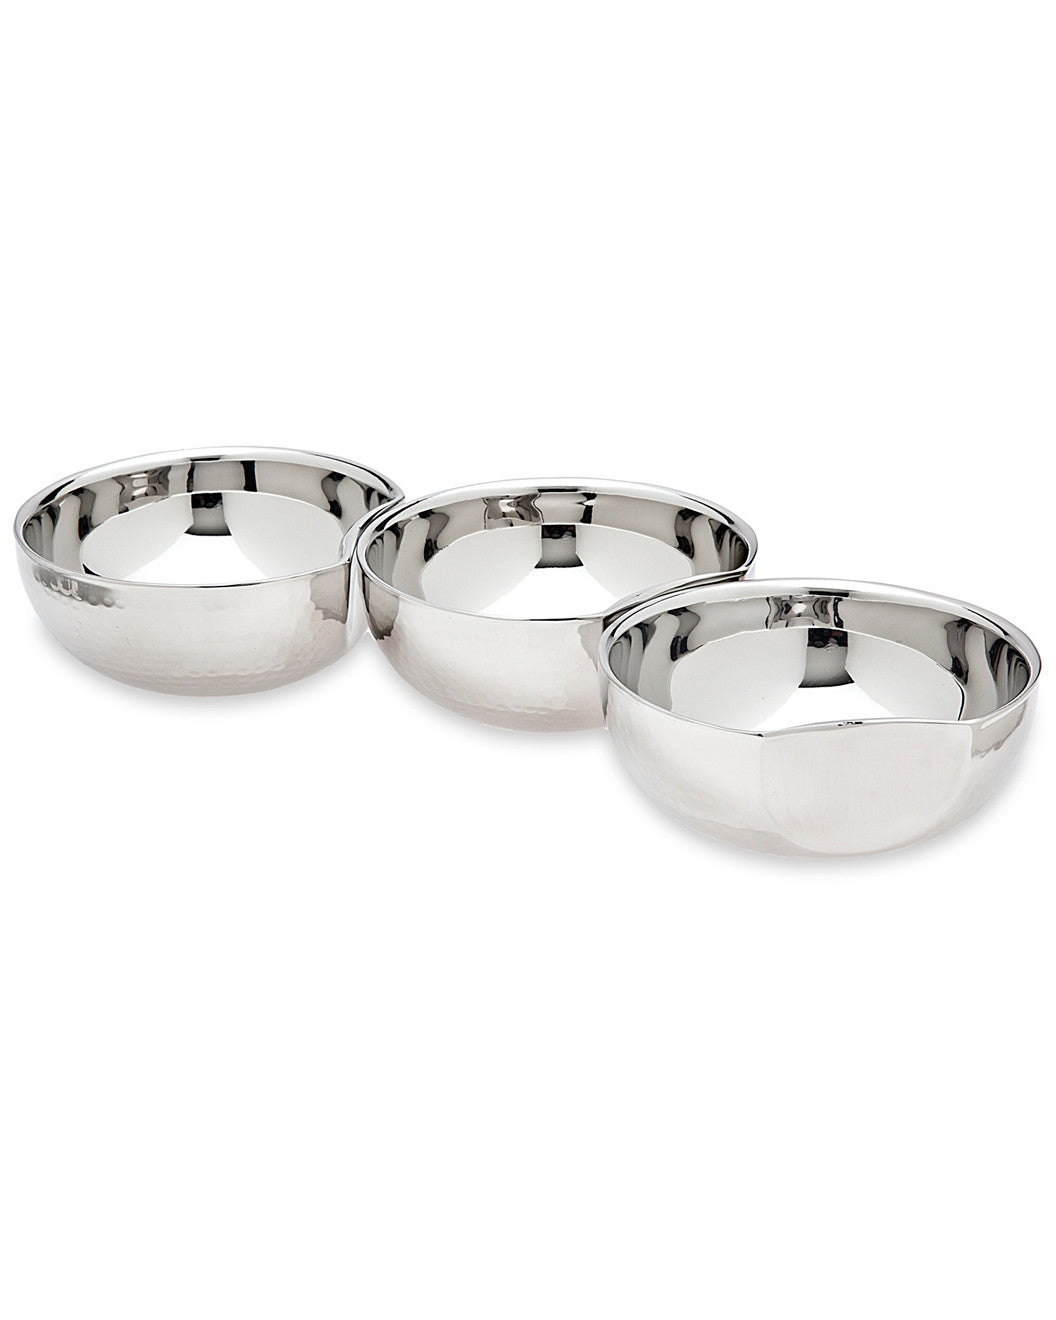 STAINLESS STEEL 3 BOWL SET